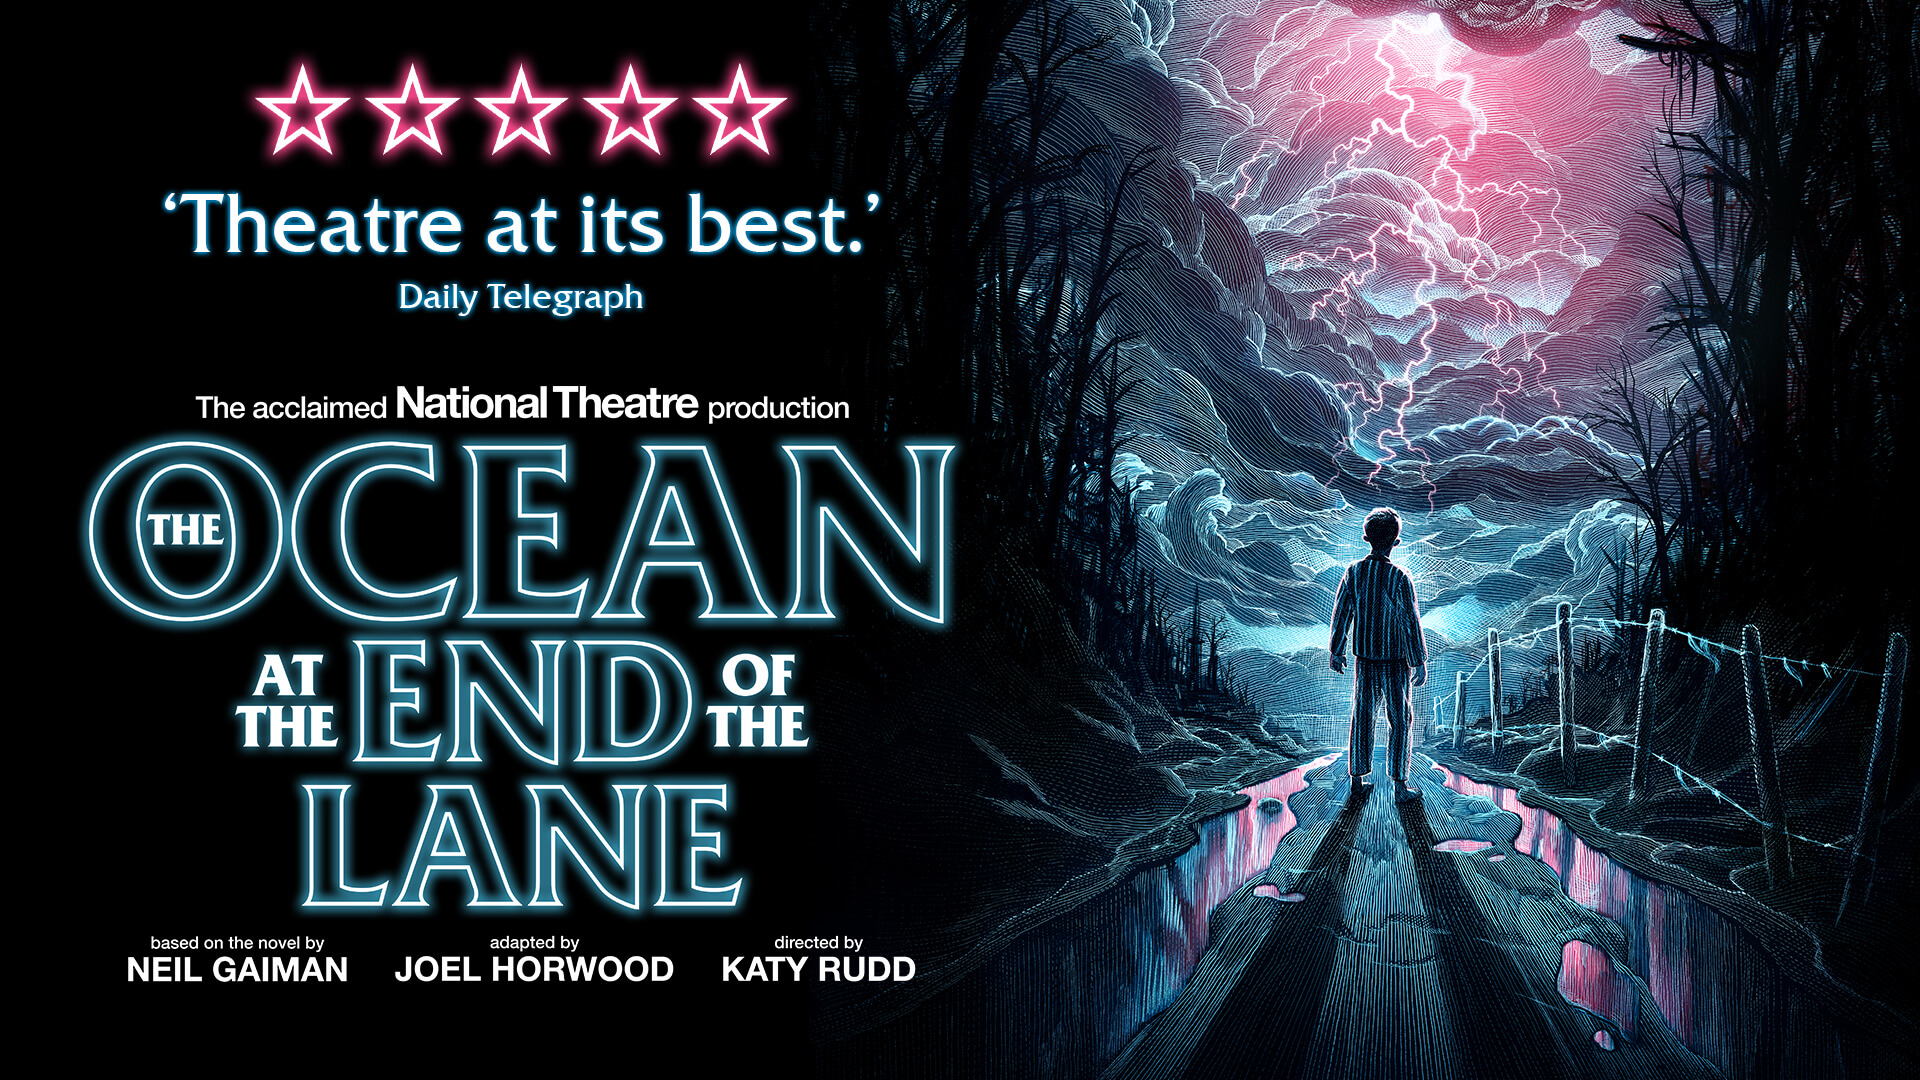 The Ocean at the End of the Lane Review